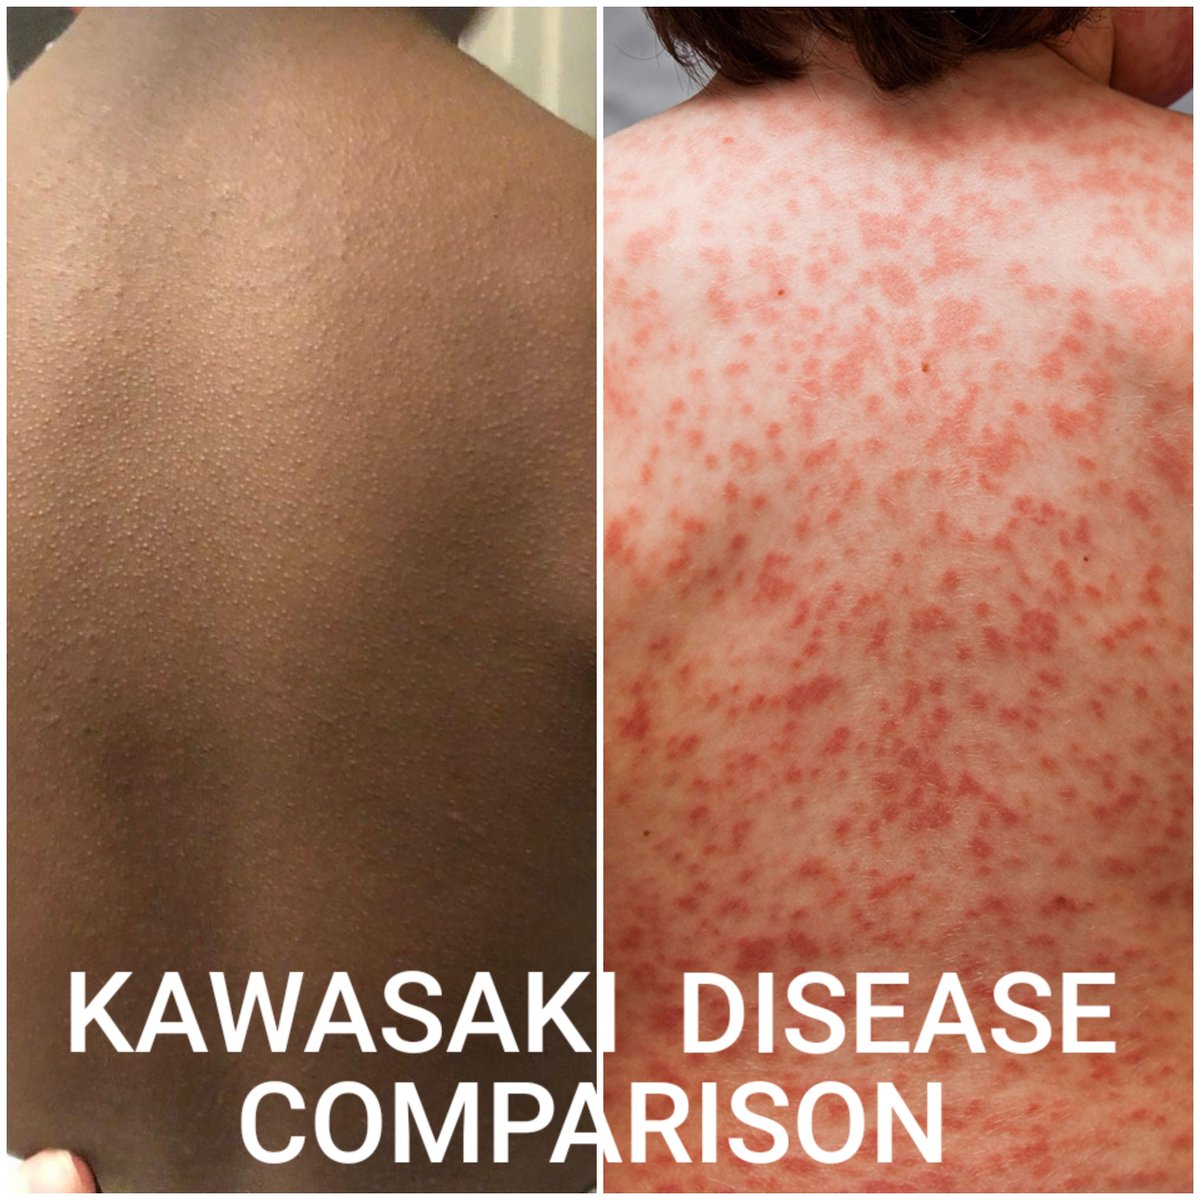 Folkeskole Overskæg rack Brown Skin Matters on Twitter: "This picture demonstrates how differently  the same disease can present on dark versus light skin. A user submitted  photograph of Kawasaki disease (left) versus the American Heart